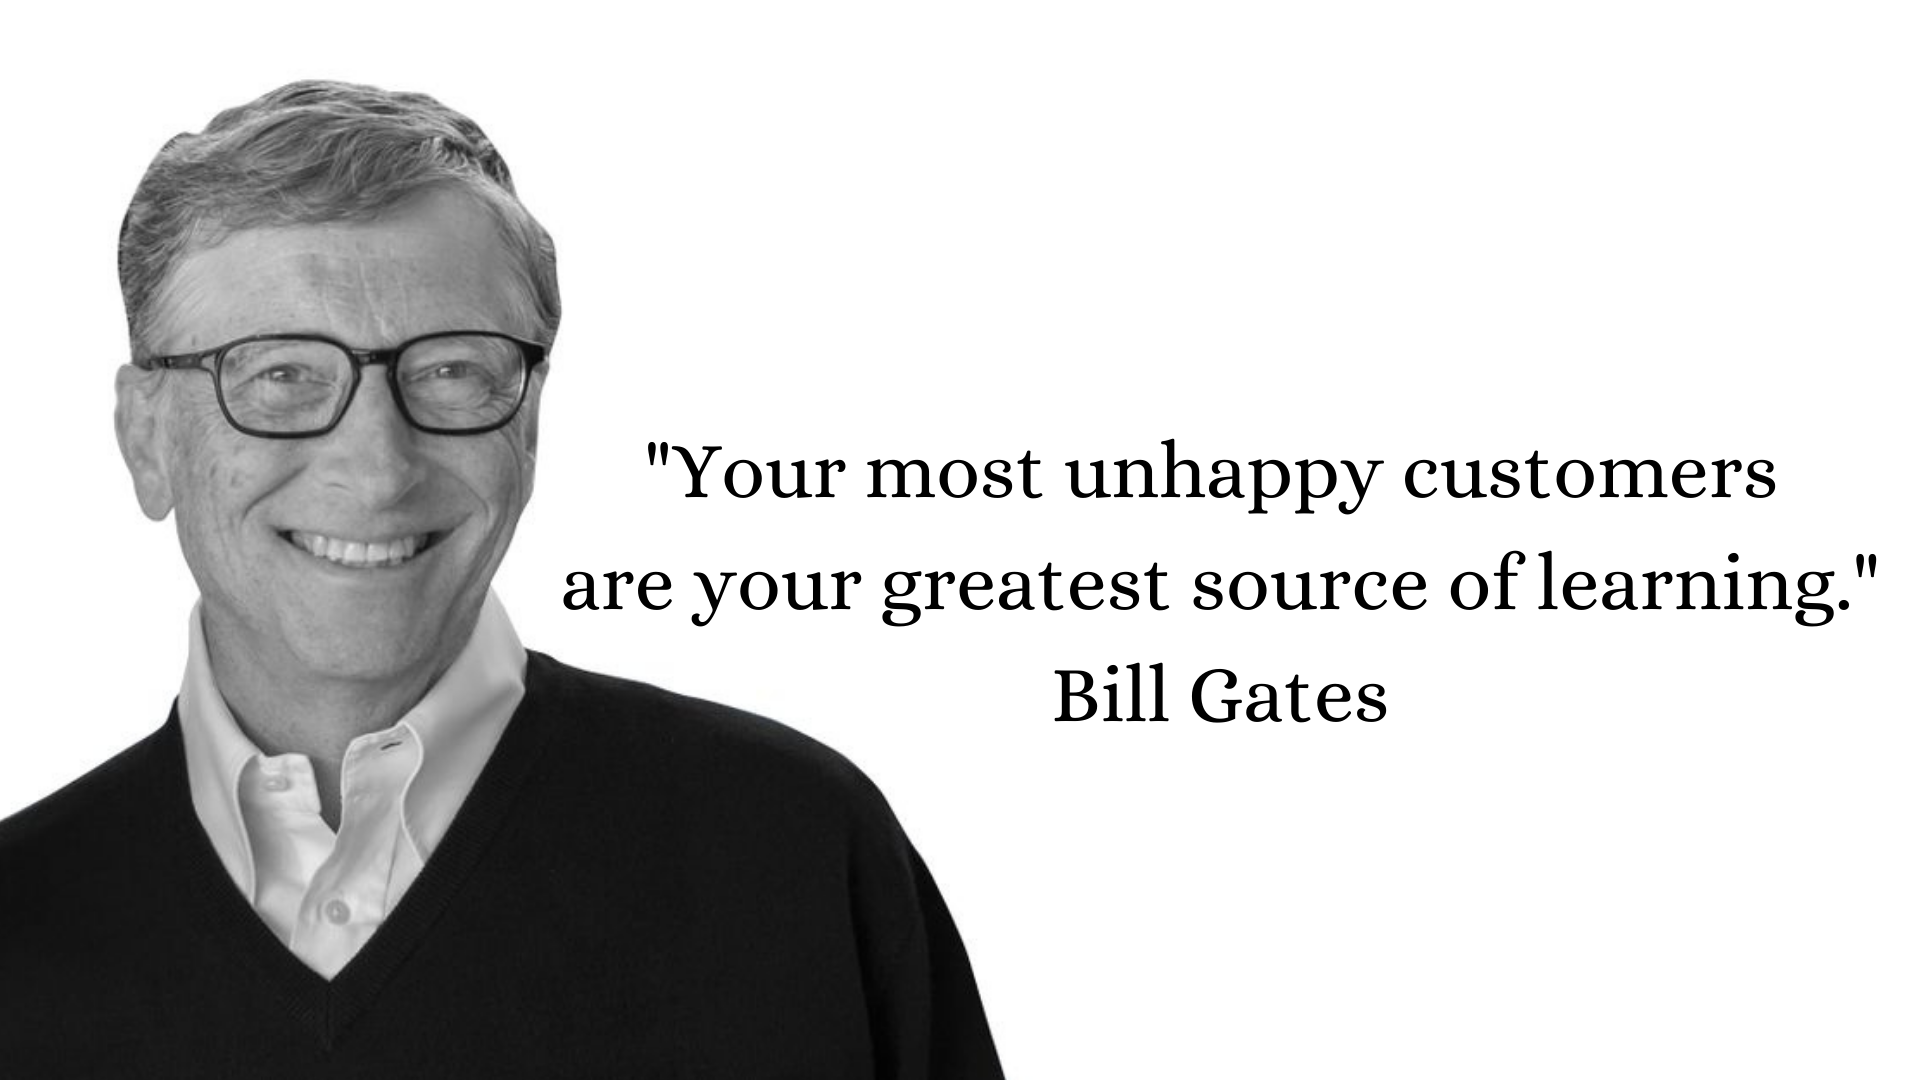 Customer Service Quotes By Famous People